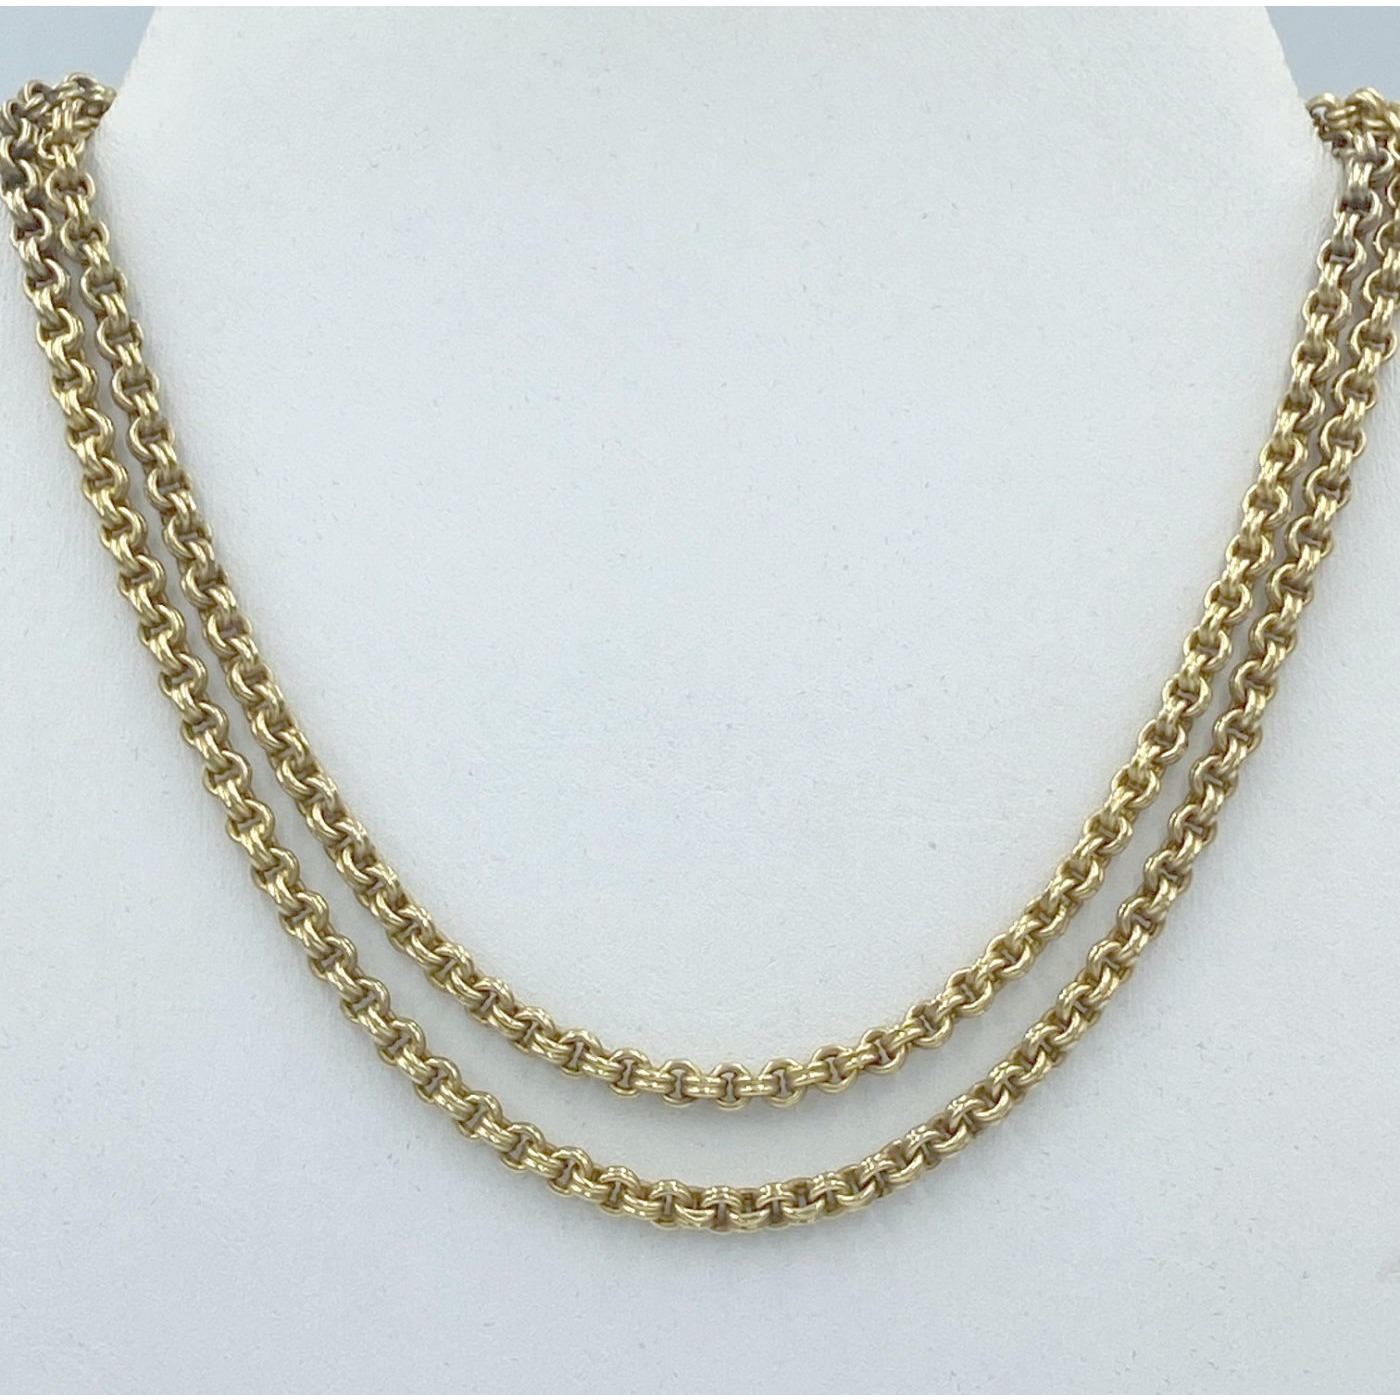 Luscious 15kt Gold Tight Rolo Link 28" Chain